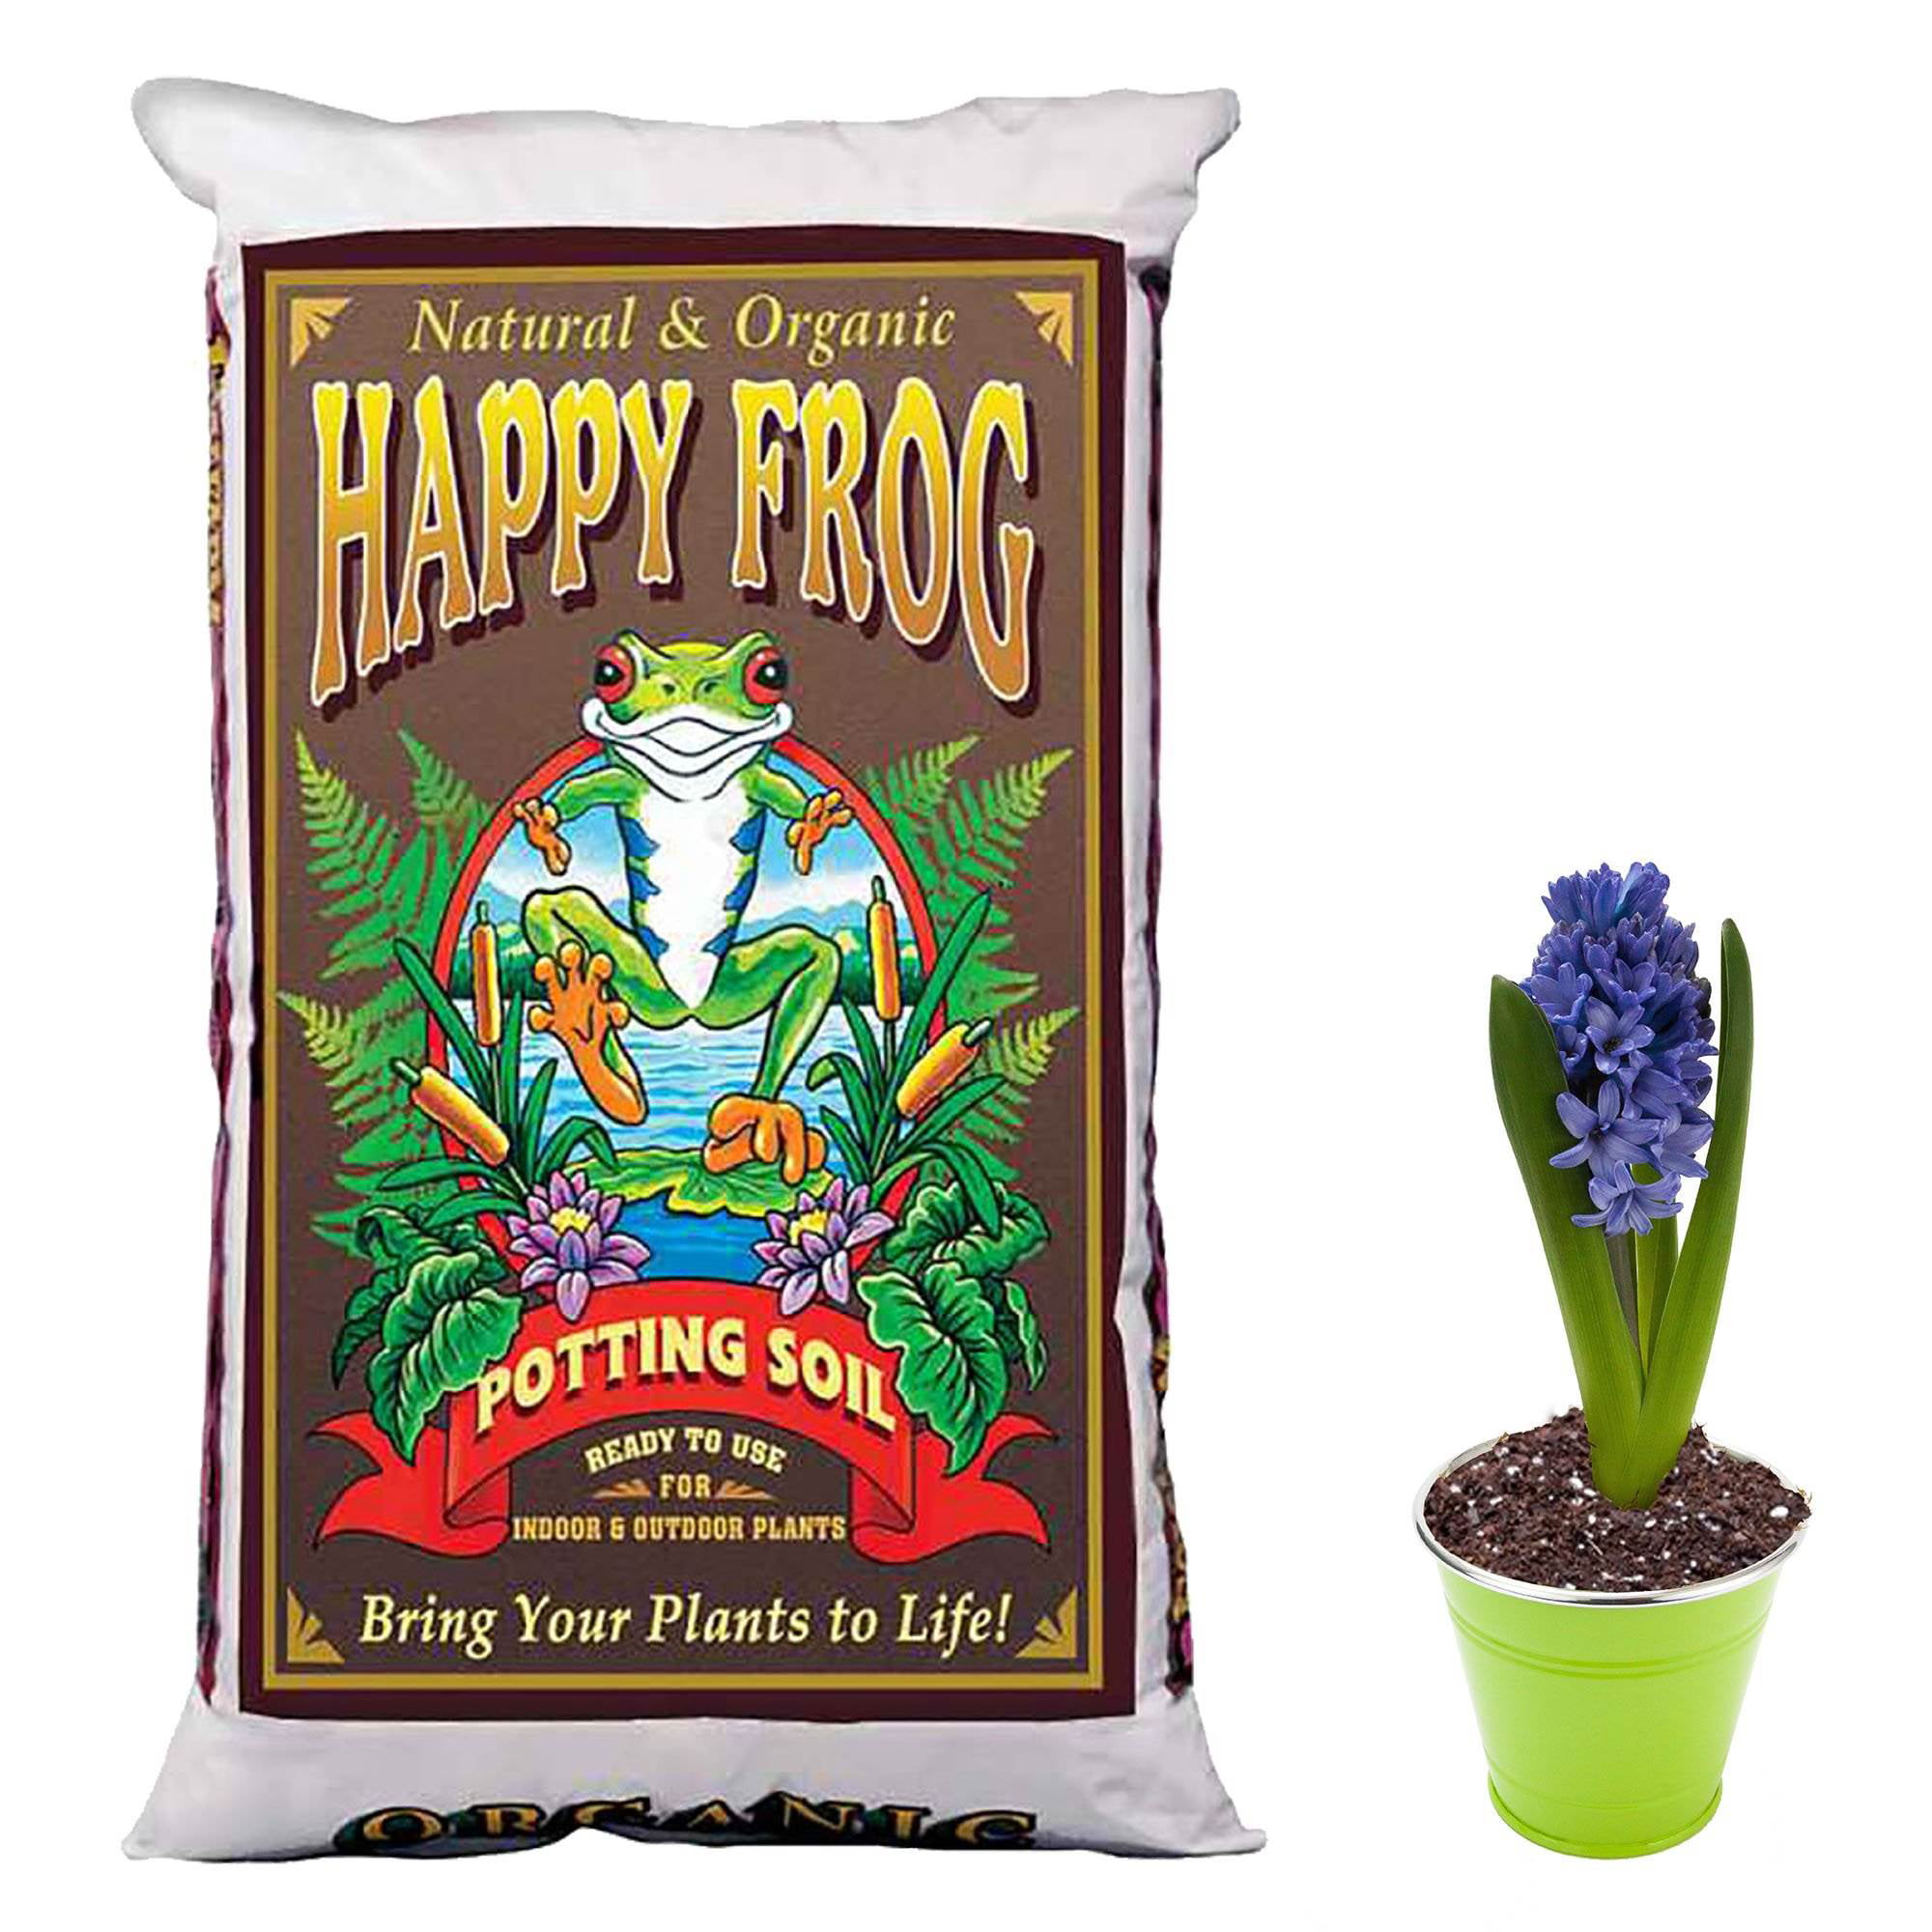 FoxFarm FX14054 Happy Frog Nutrient Rich and pH Adjusted Rapid Growth Garden Potting Soil Mix is Ready to Use 12 Quart Limited Edition 